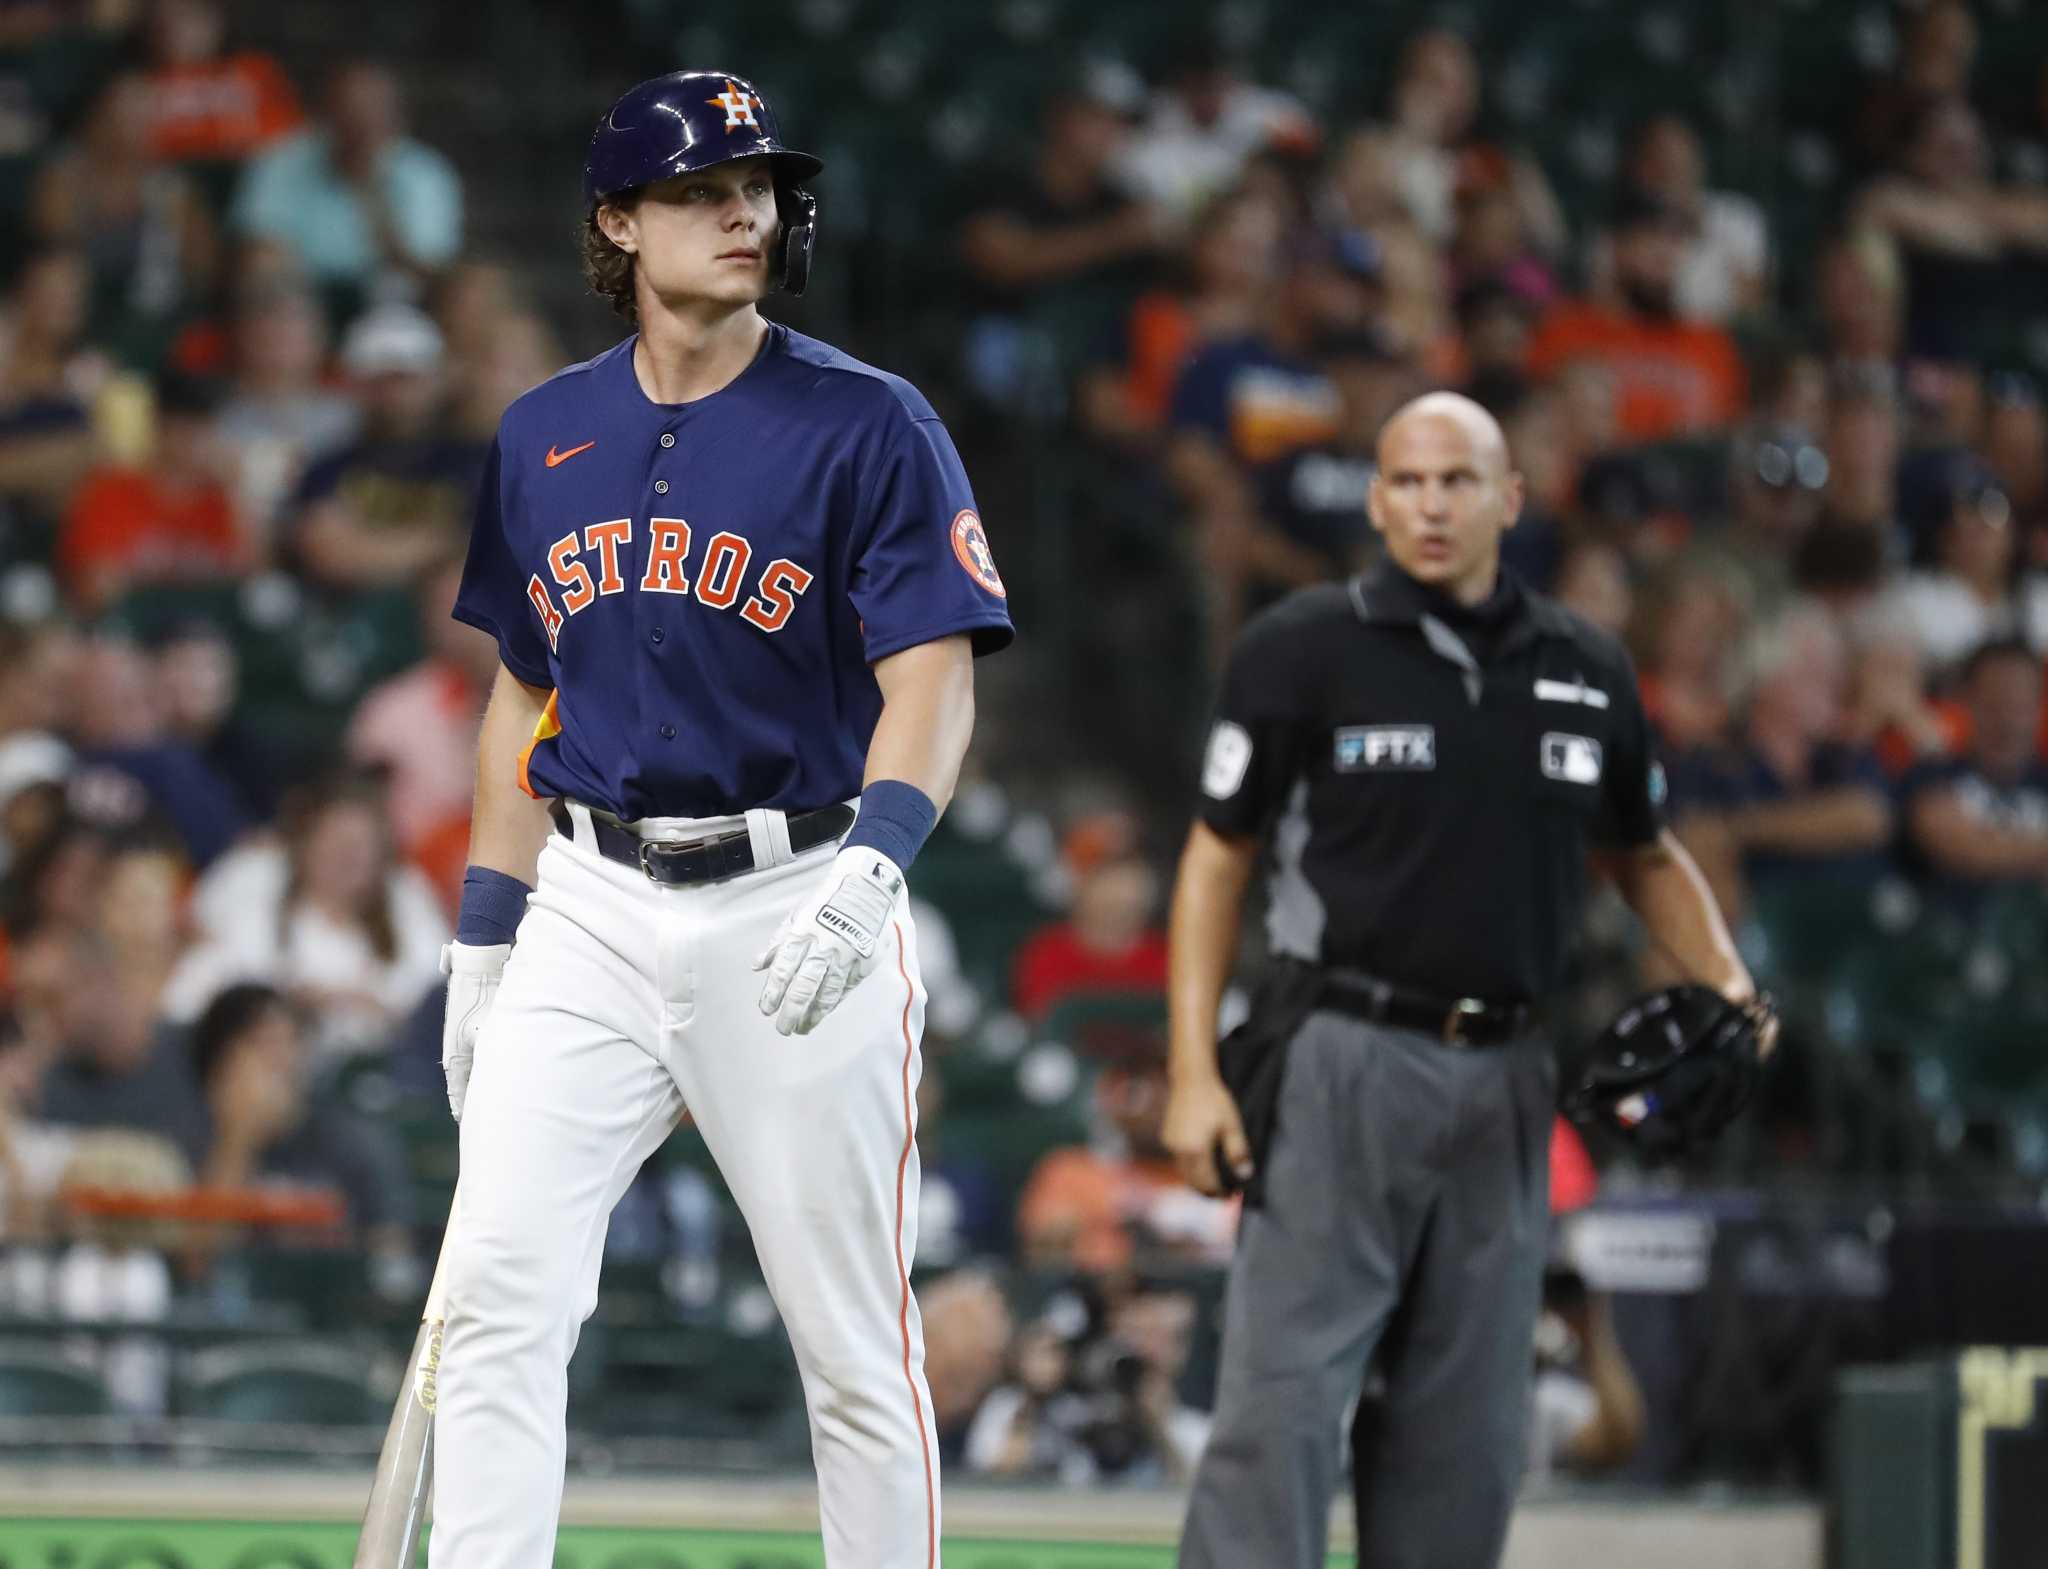 Jake Meyers gets first start since call-up to Astros